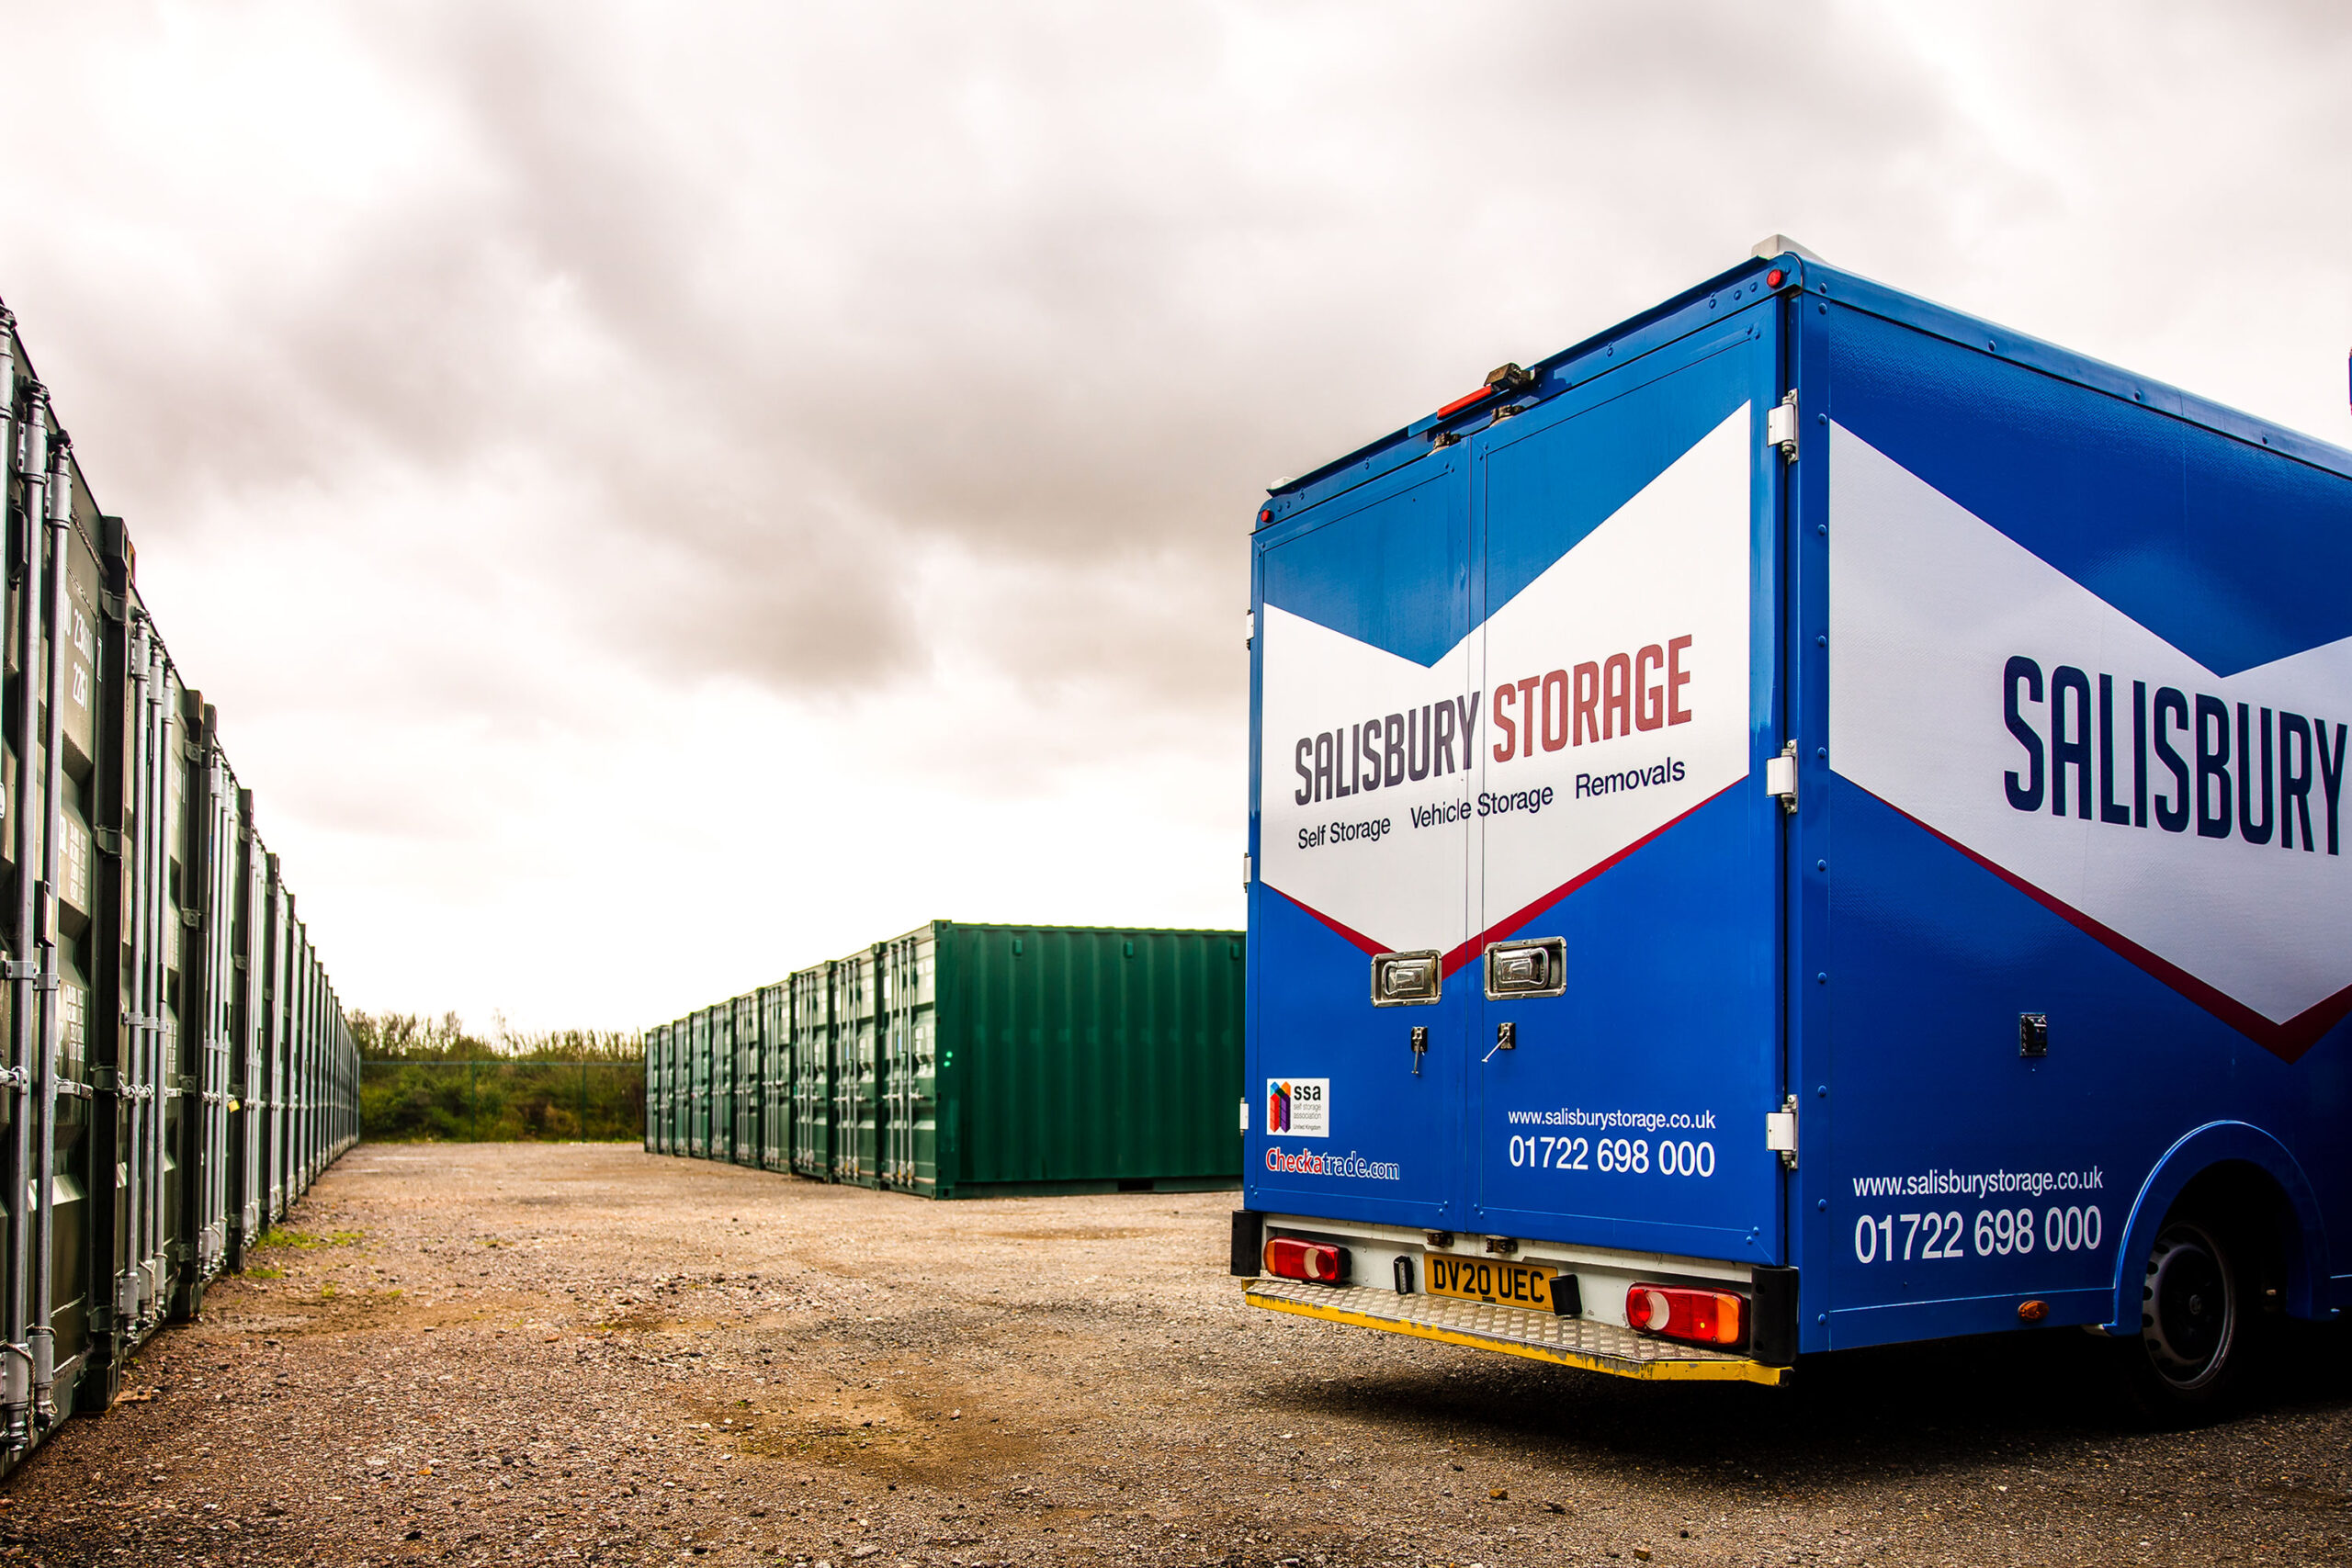 A blue removals and storage lorry, parked in the middle of dark green storage containers.